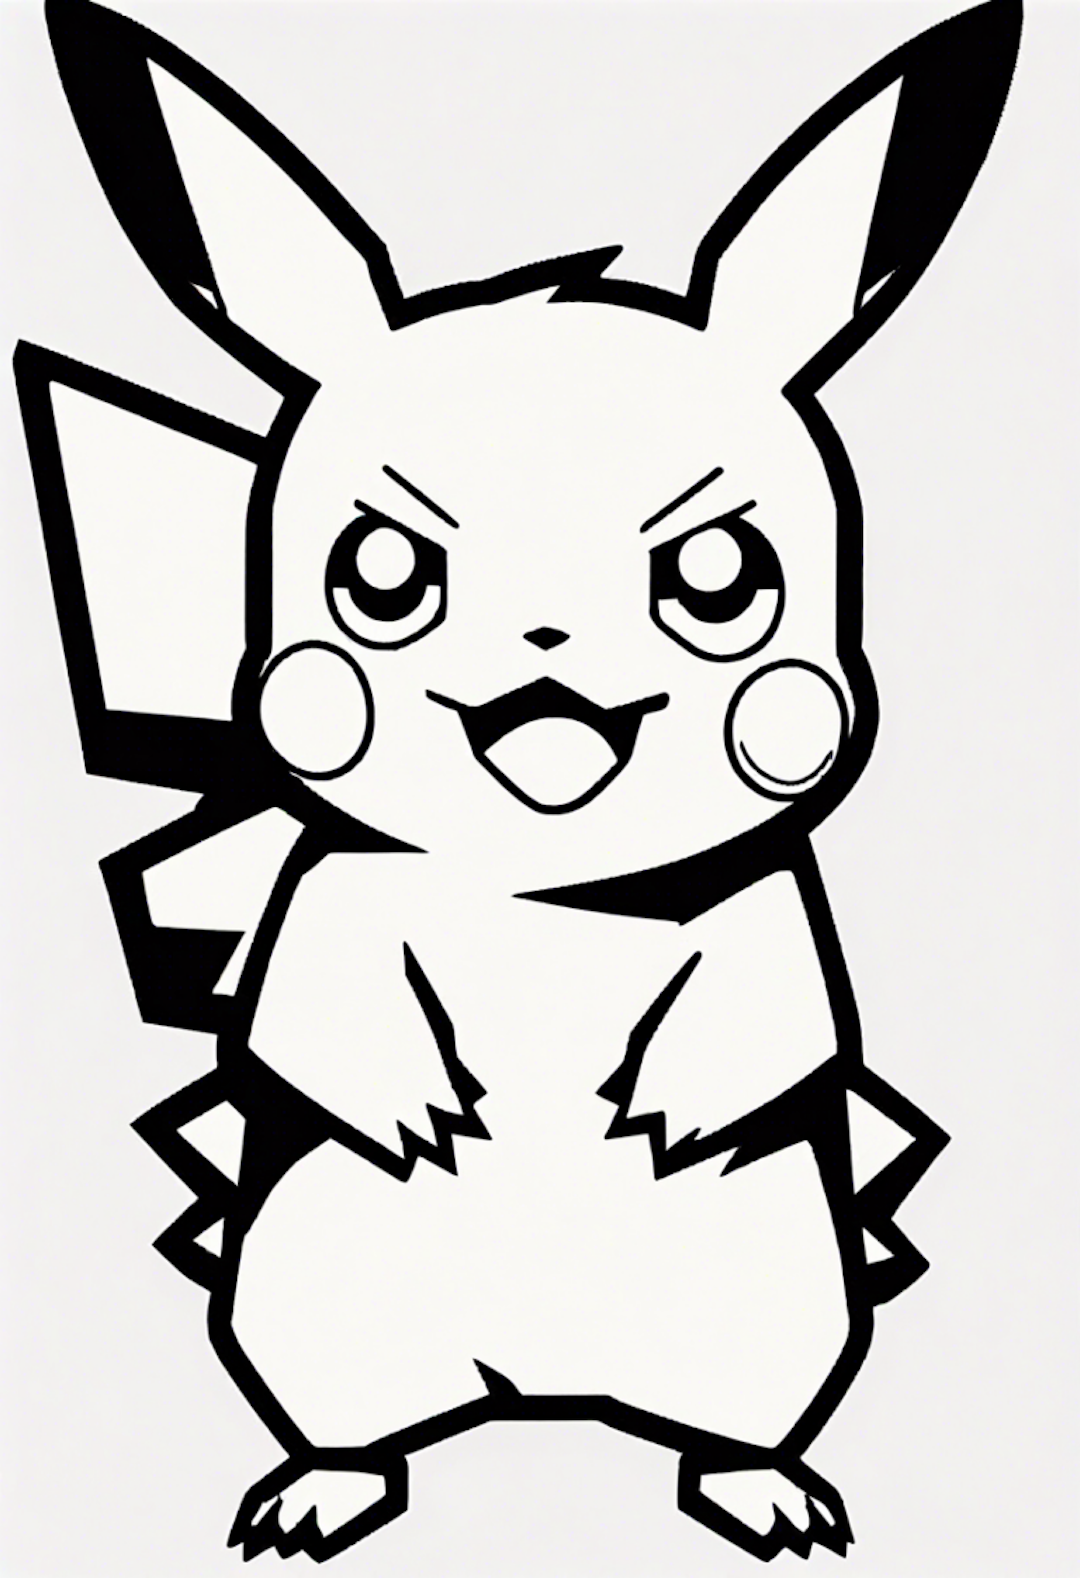 Pikachu Coloring Page coloring pages